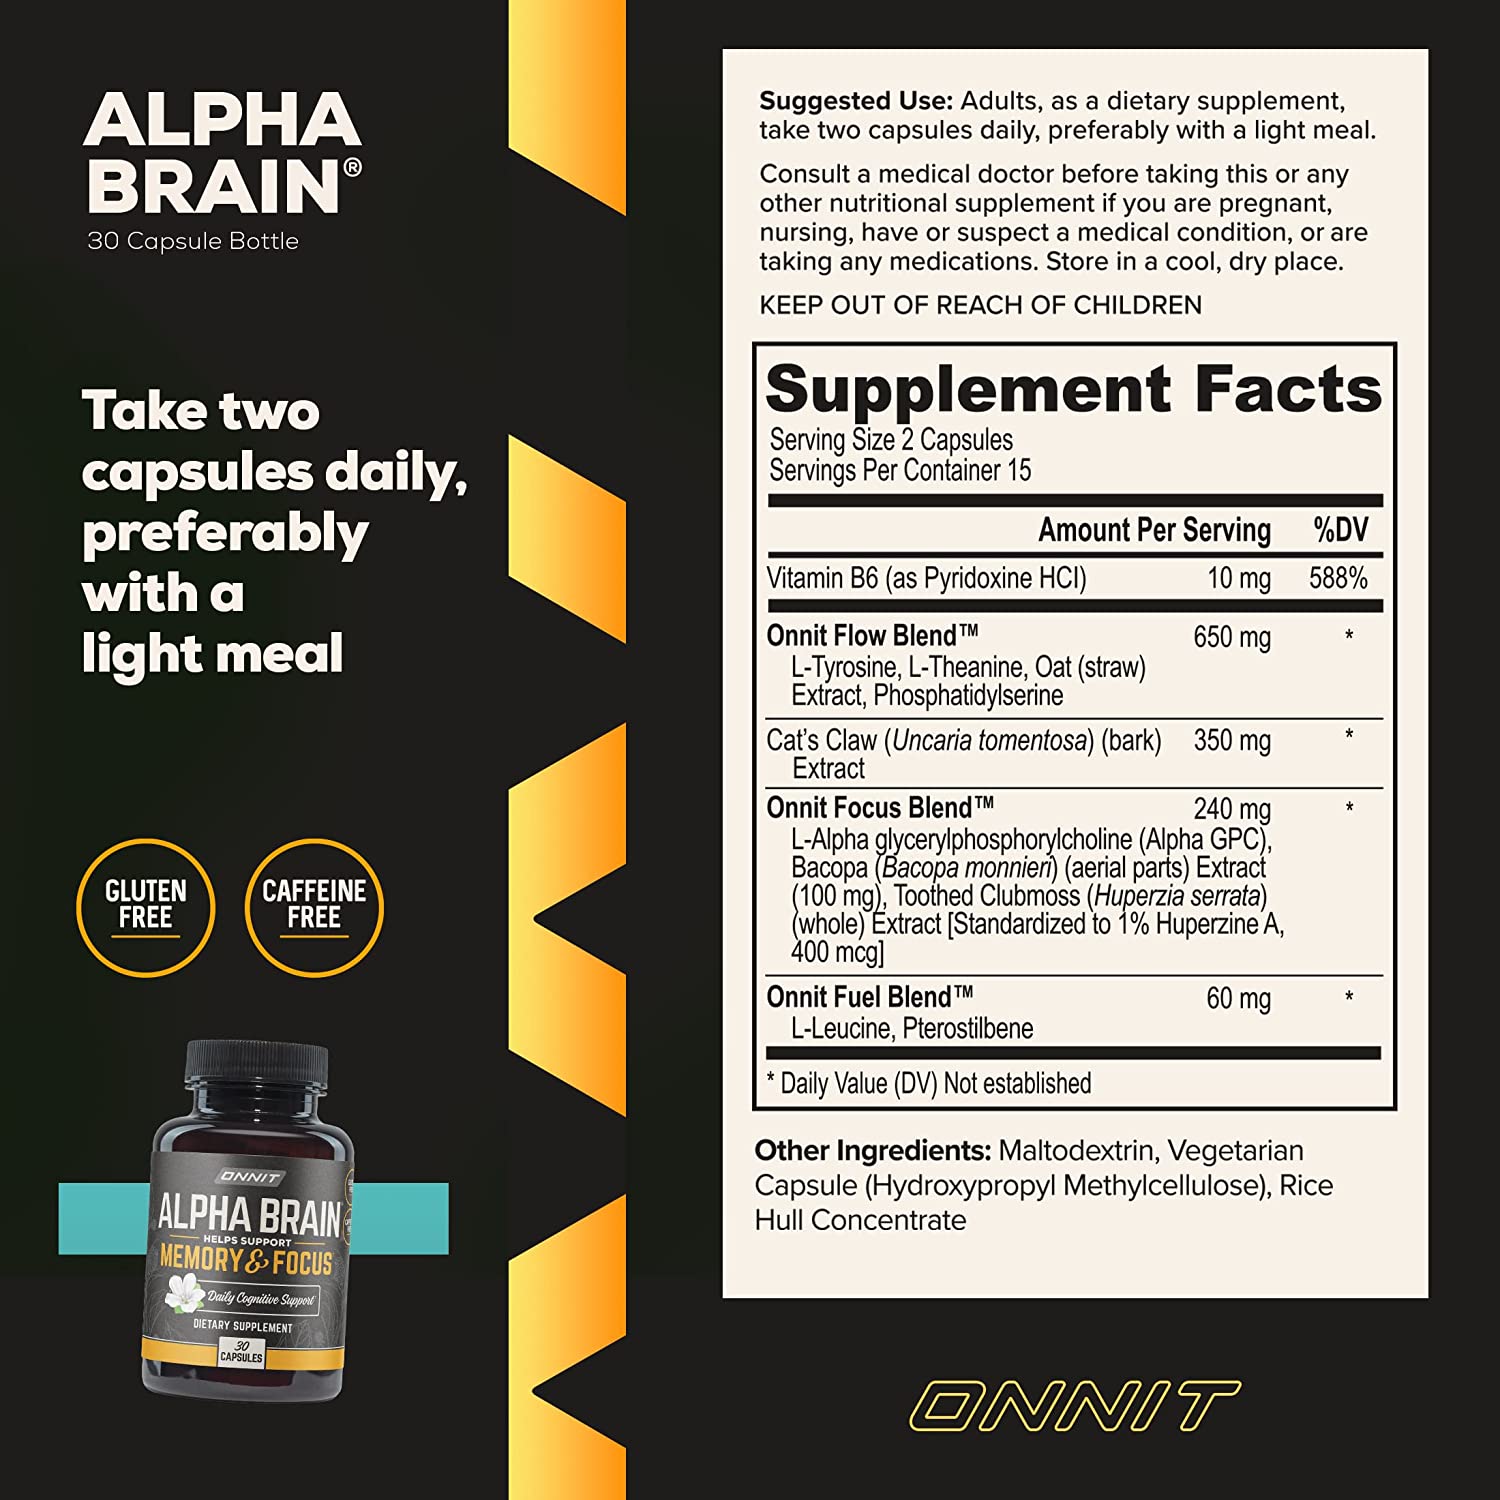 Onnit Alpha Brain Review The Top Supplements